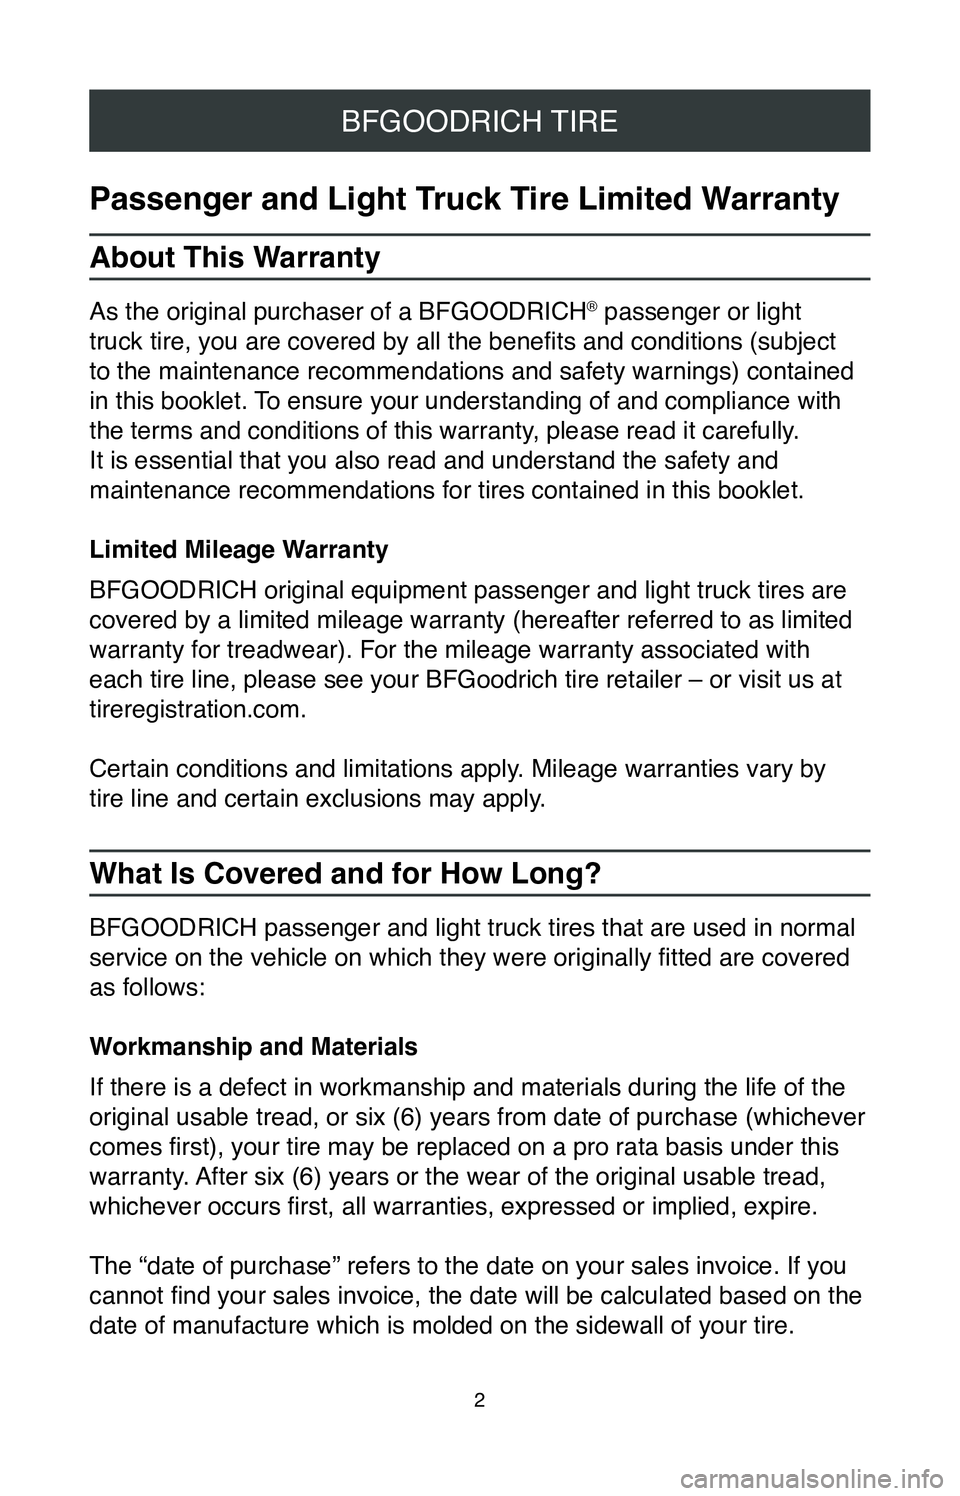 TOYOTA MIRAI 2020  Warranties & Maintenance Guides (in English) 2
BFGOODRICH TIRE
Passenger and Light Truck Tire Limited Warranty
About This Warranty
As the original purchaser of a BFGOODRICH® passenger or light 
truck tire, you are covered by all the benefits an